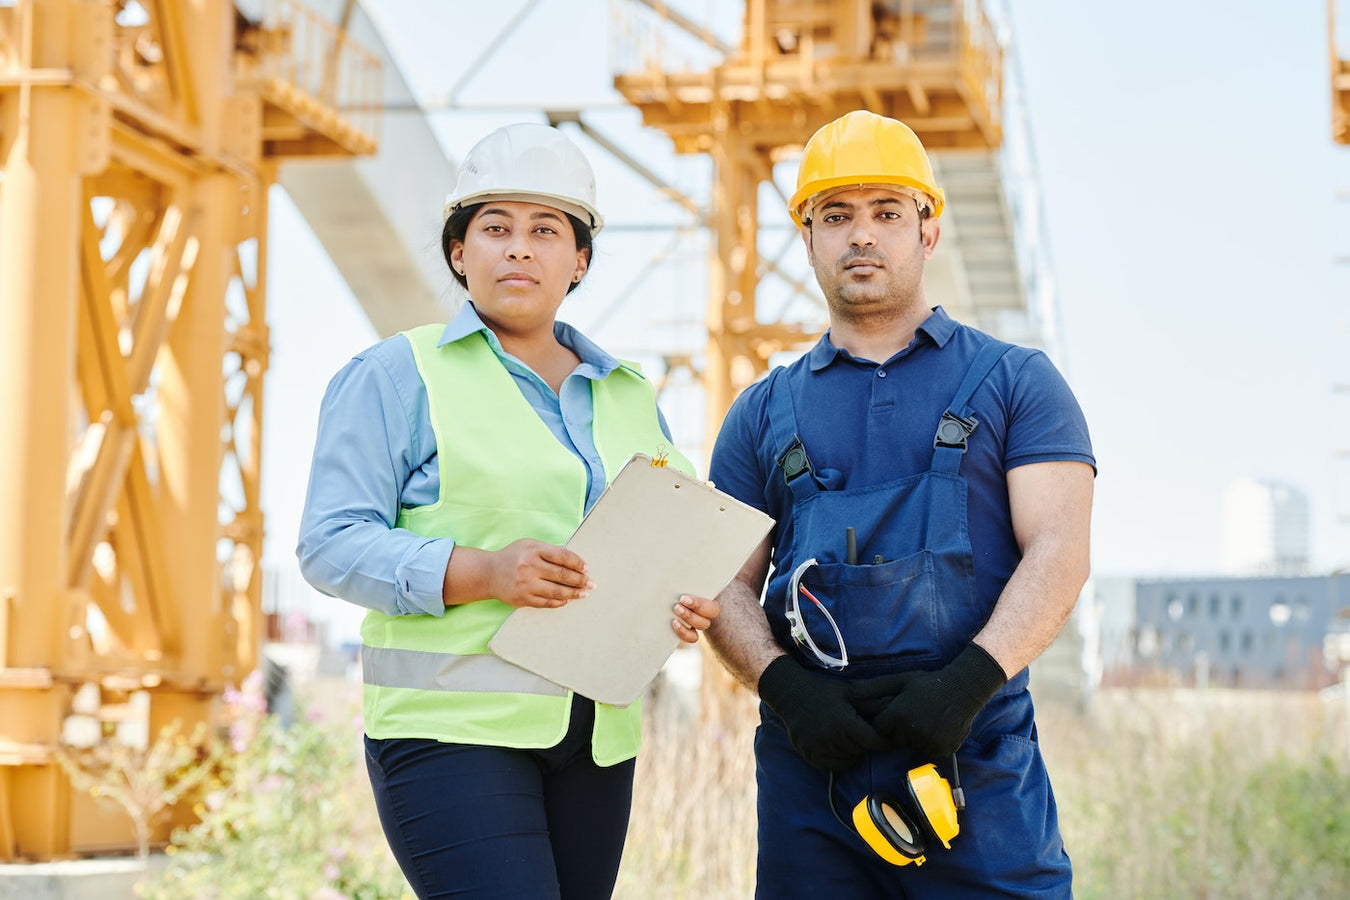 Two people standing at a construction site. On the left they are wearing a white hardhat, green safety vest, and holding a clipboard. On the right, they are wearing a yellow hardhat and a blue work apron.